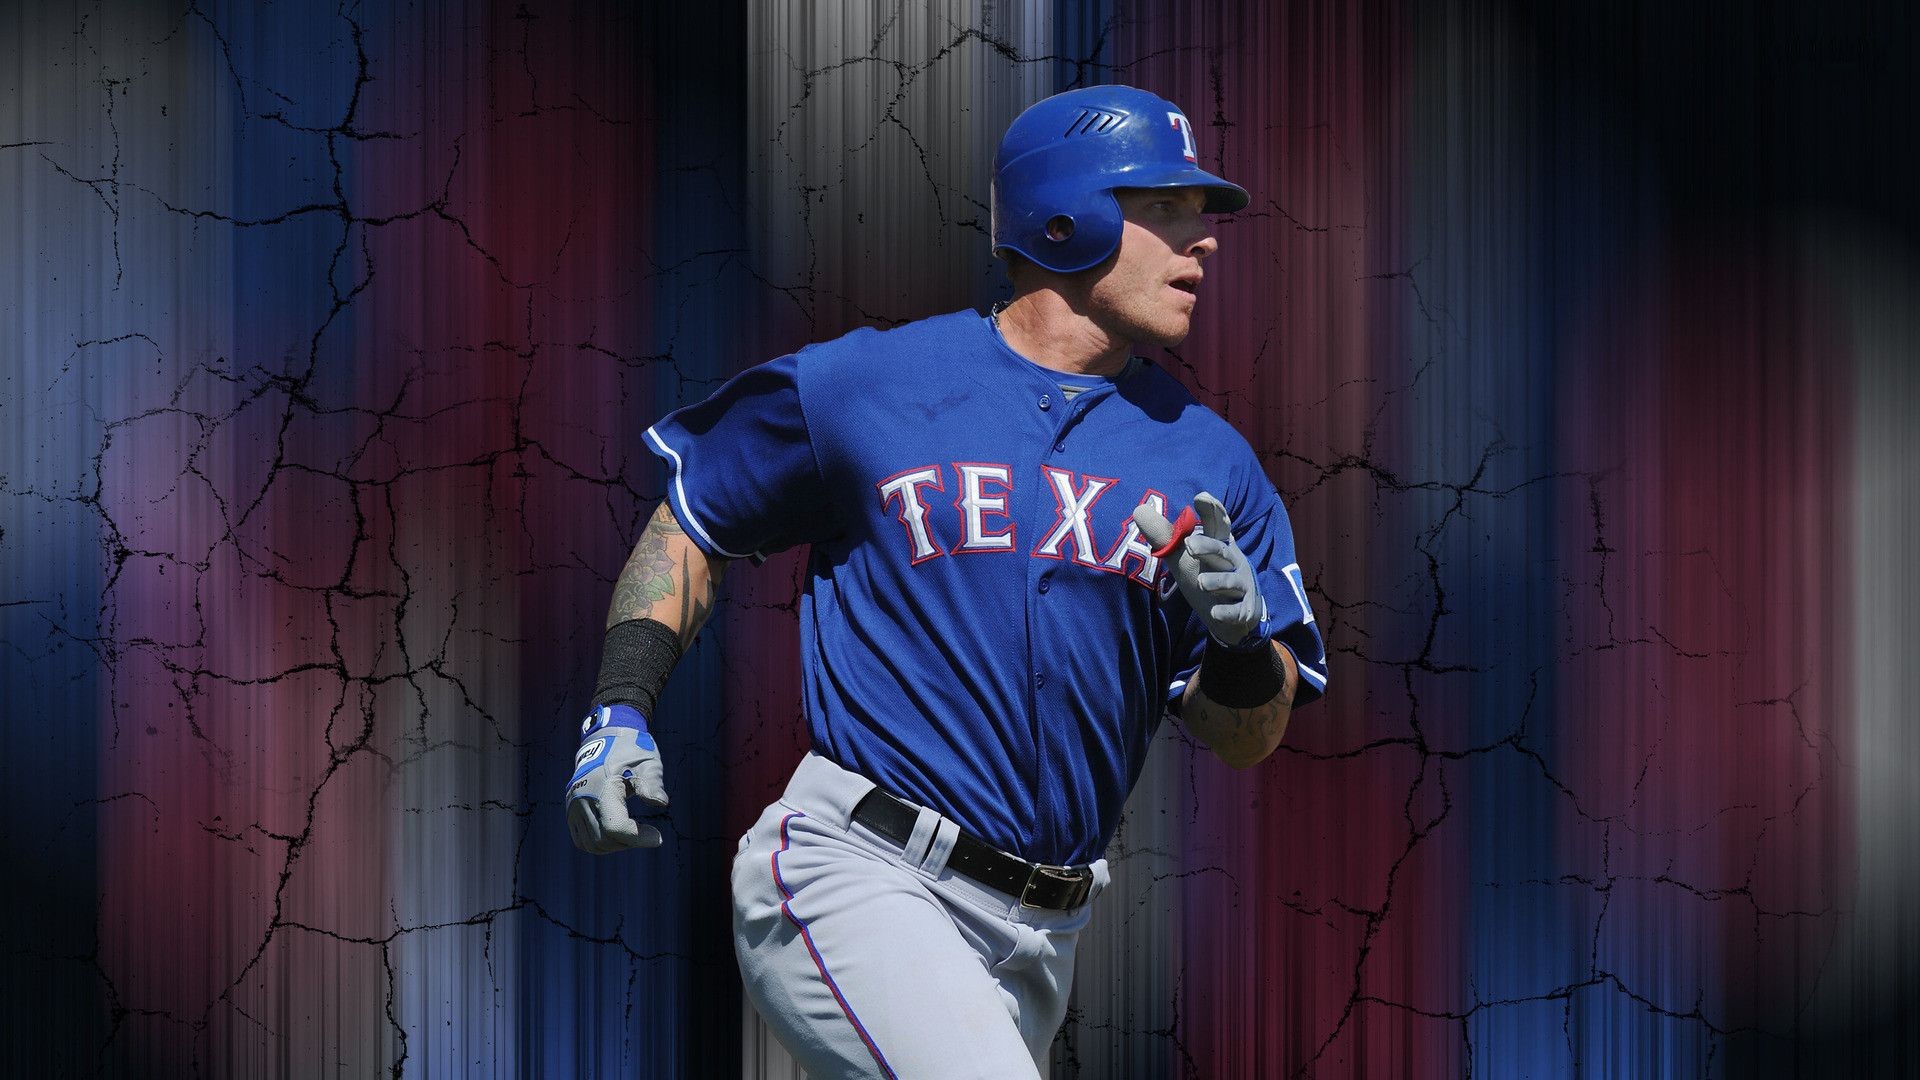 1920x1080 Texas Rangers Android Wallpaper HD Android Wallpapers Pinterest